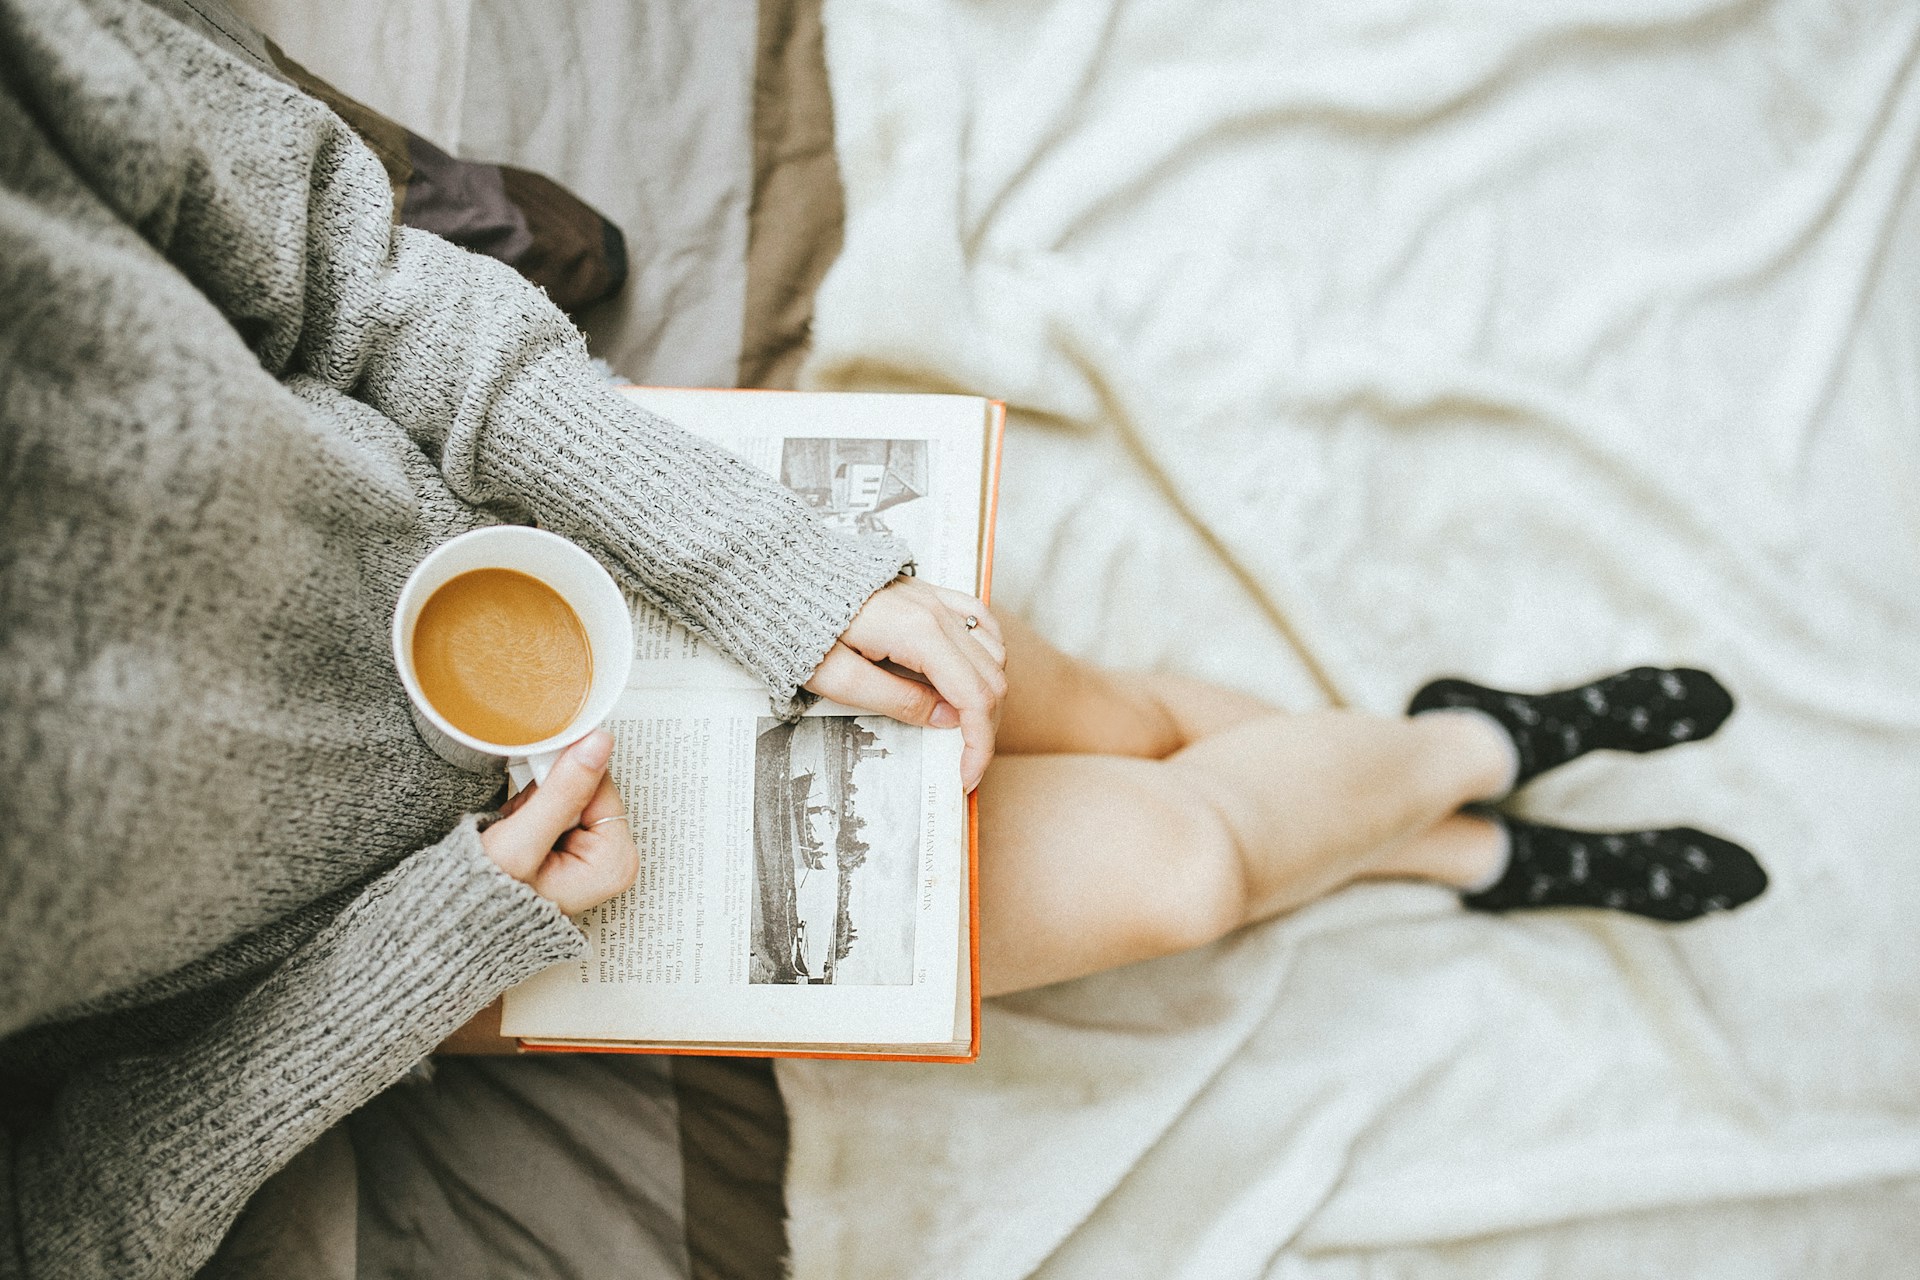 A woman reading a book in her lap and drinking a cup of coffee